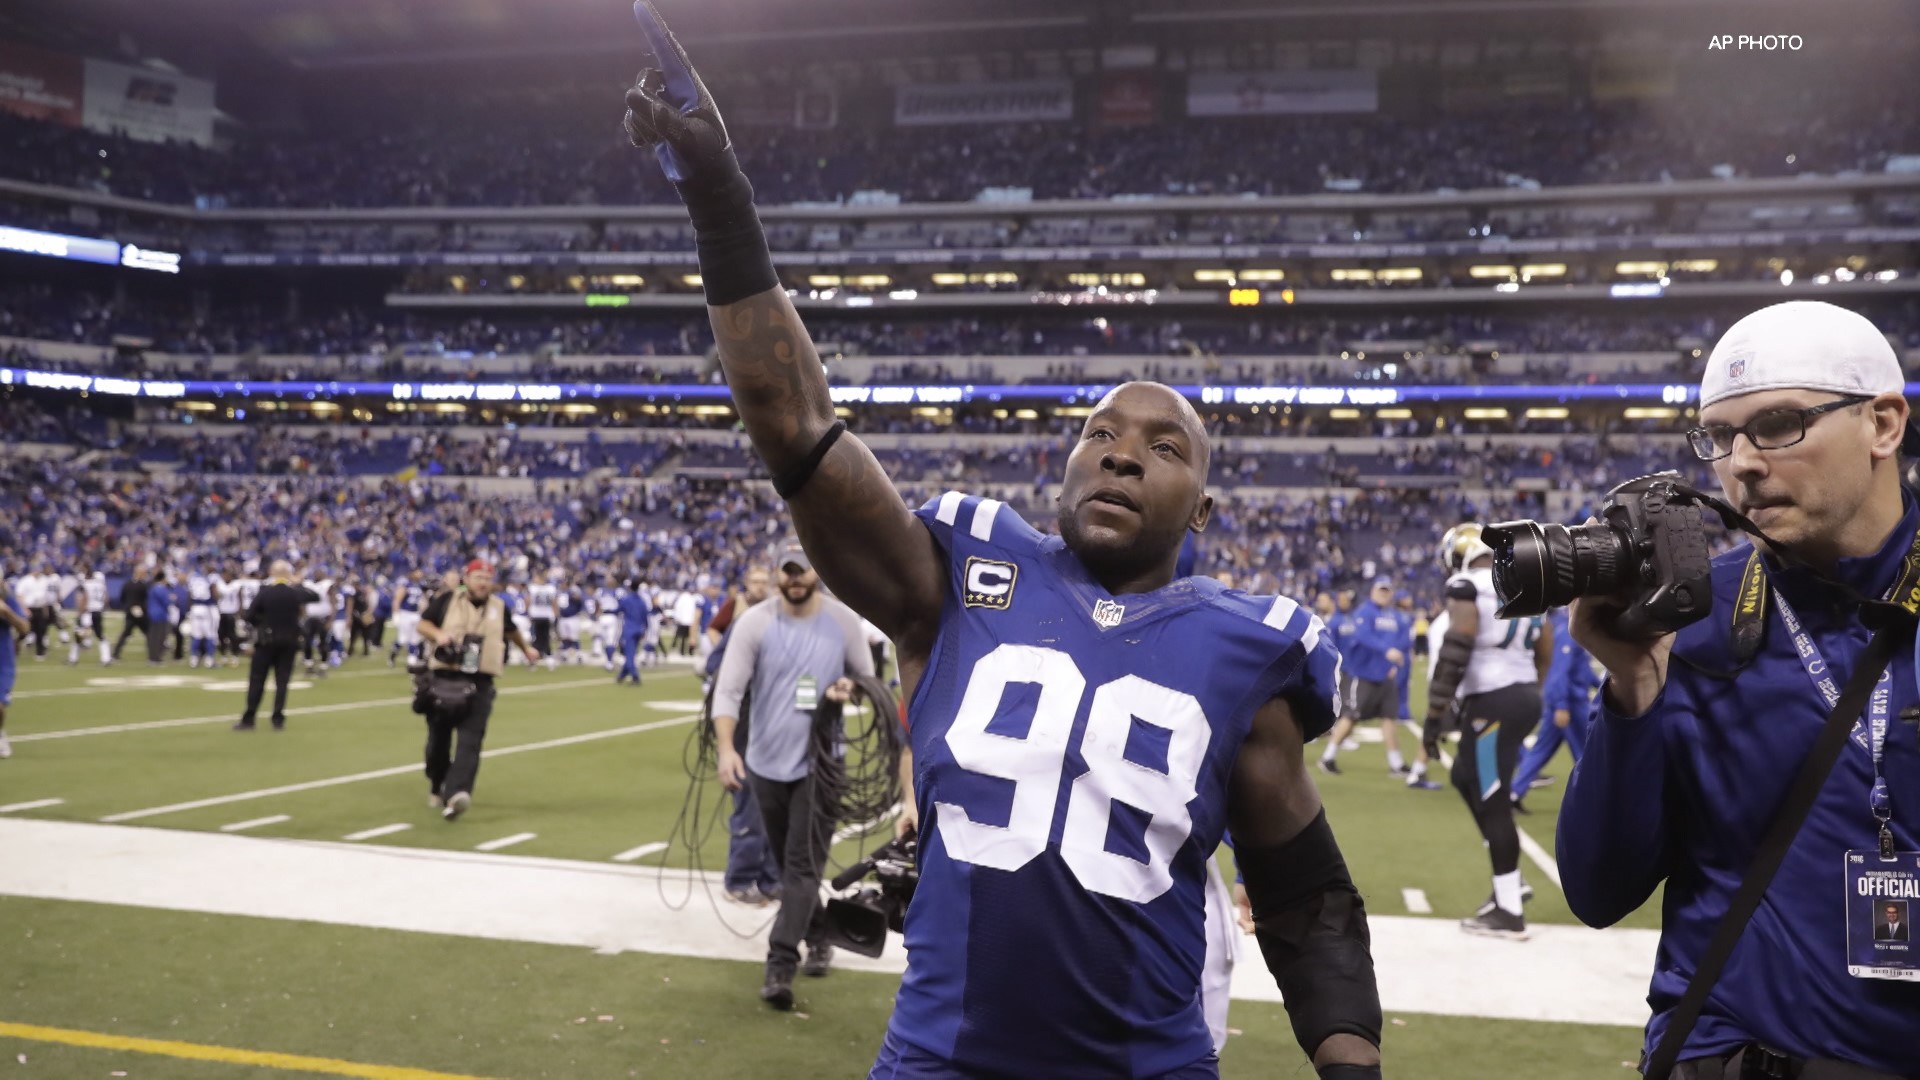 Former Alabama A&M All-American Robert Mathis took another step toward Canton on Wednesday, with the Pro Football Hall of Fame announcing them among 26 semifinalists